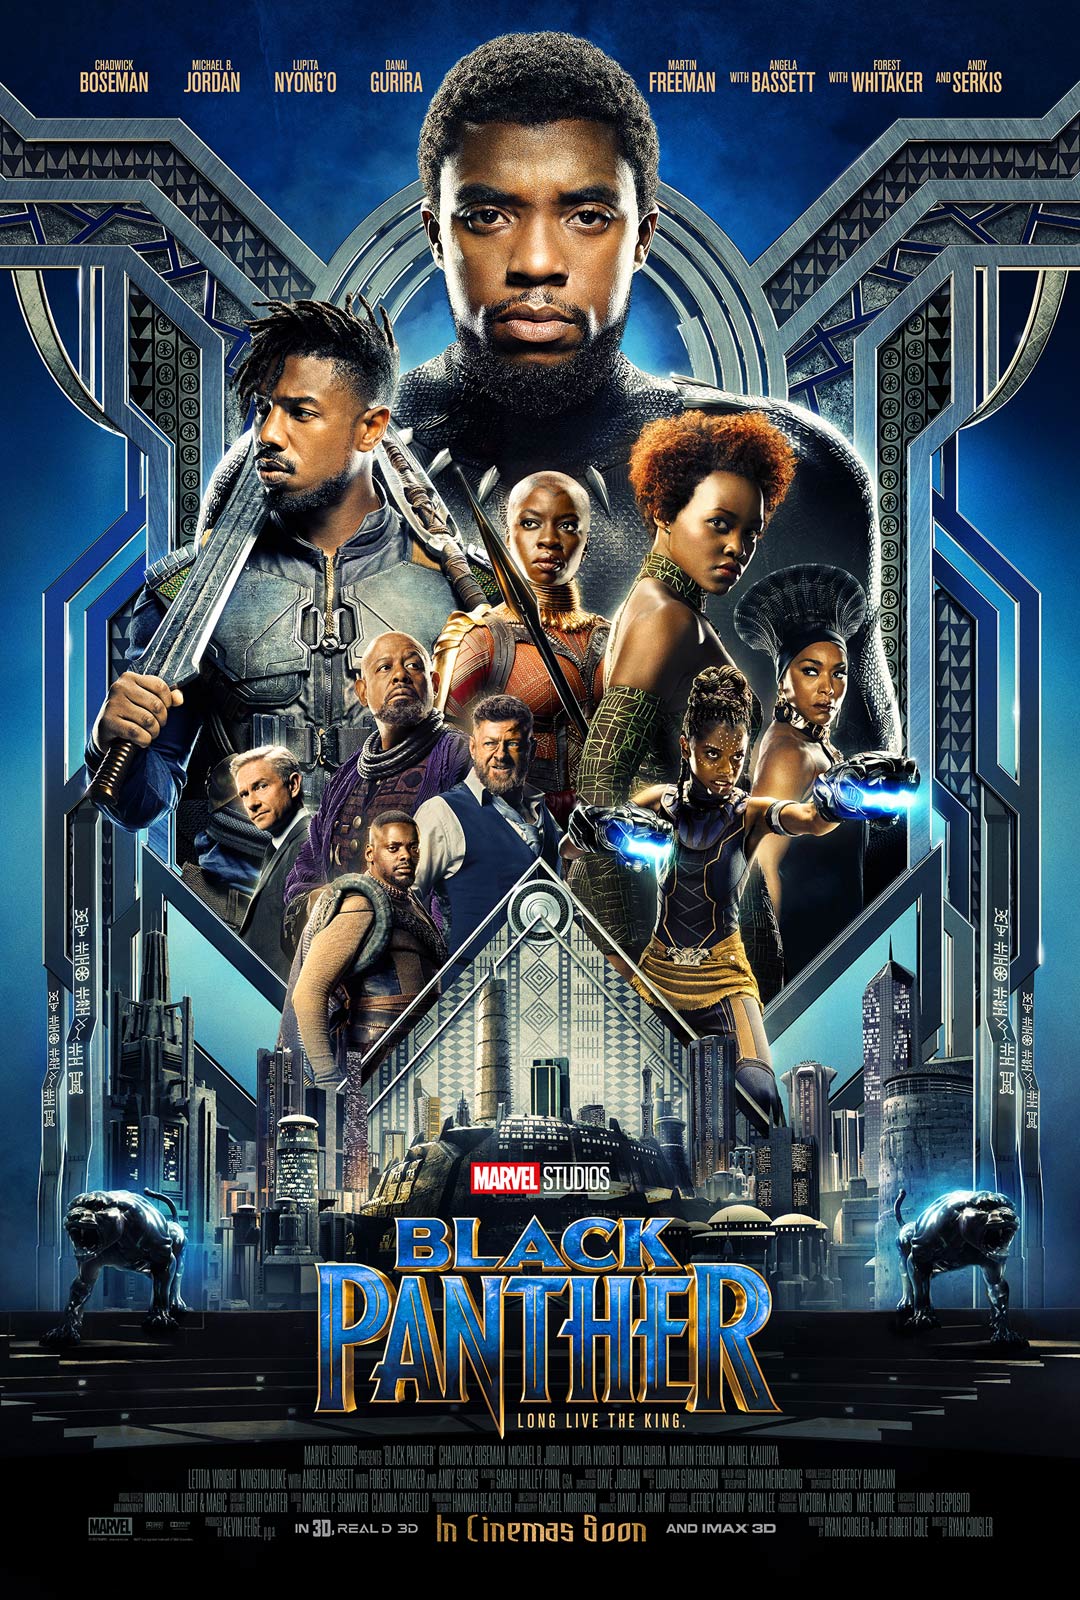 Black panther affiche 1